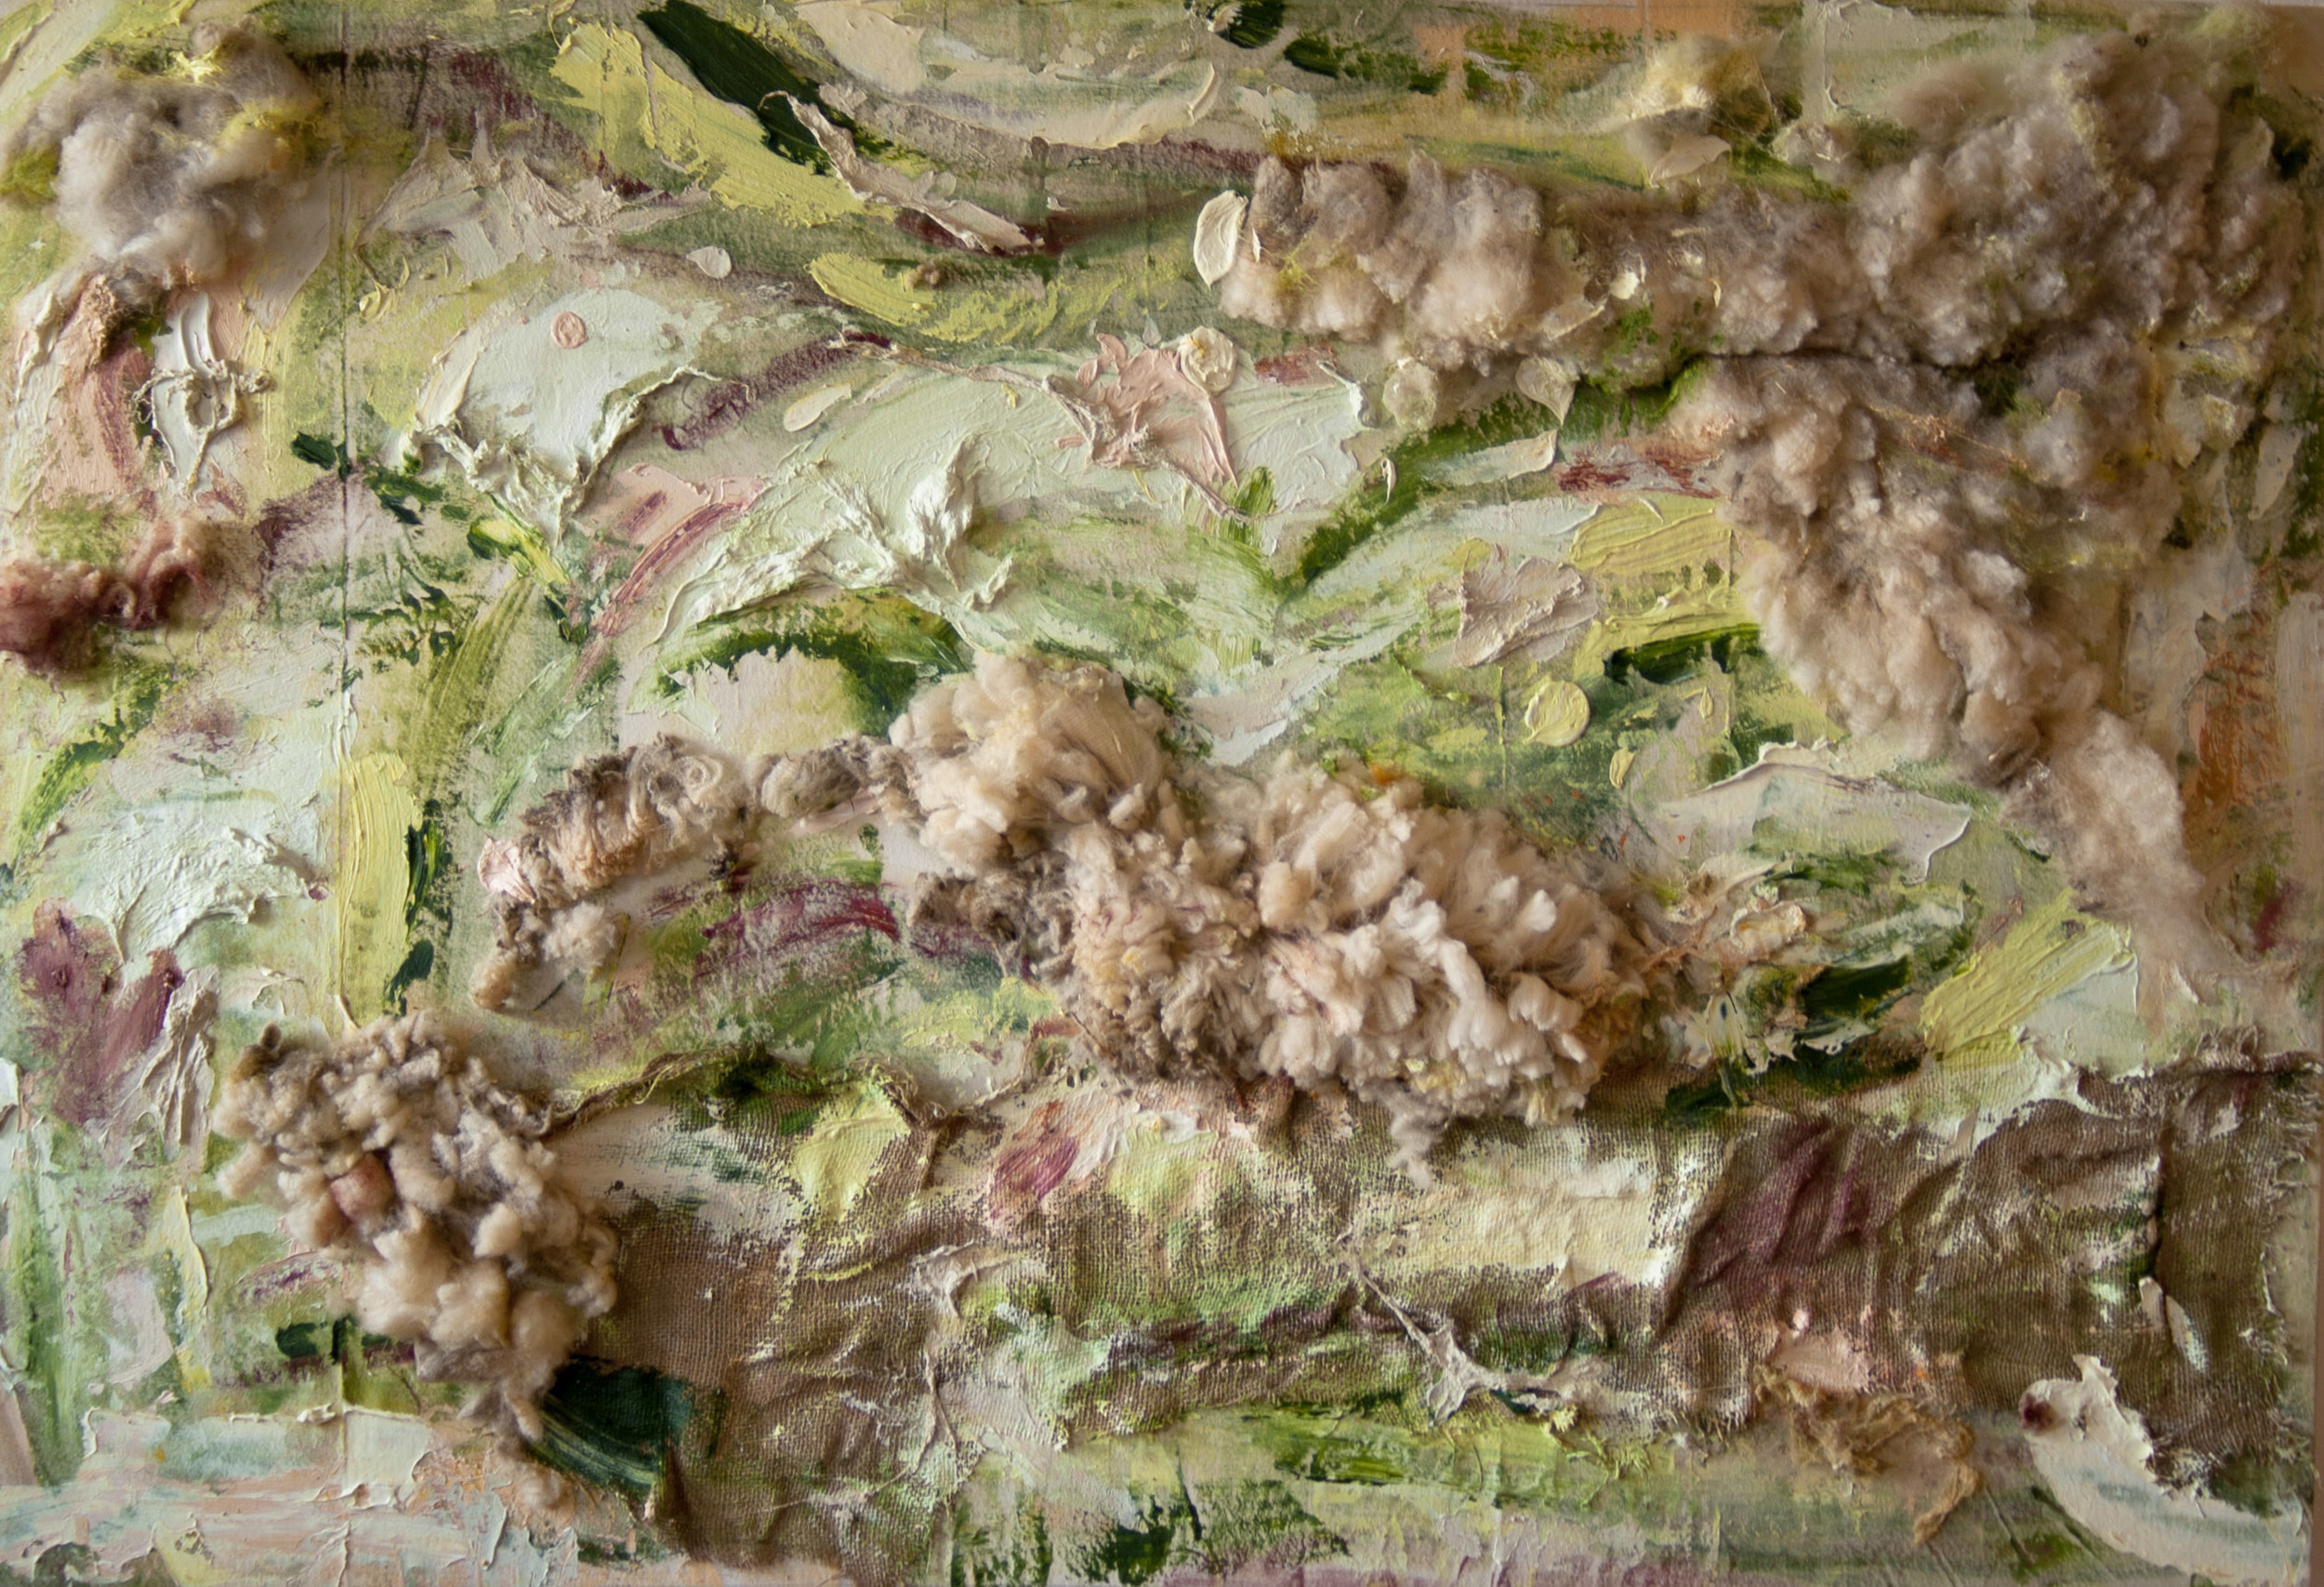  untitled I (sheep meadow), nyc, 2015    oil, acrylic, sheep wool, and burlap on unprimed canvas    43 x 63.5 inches 